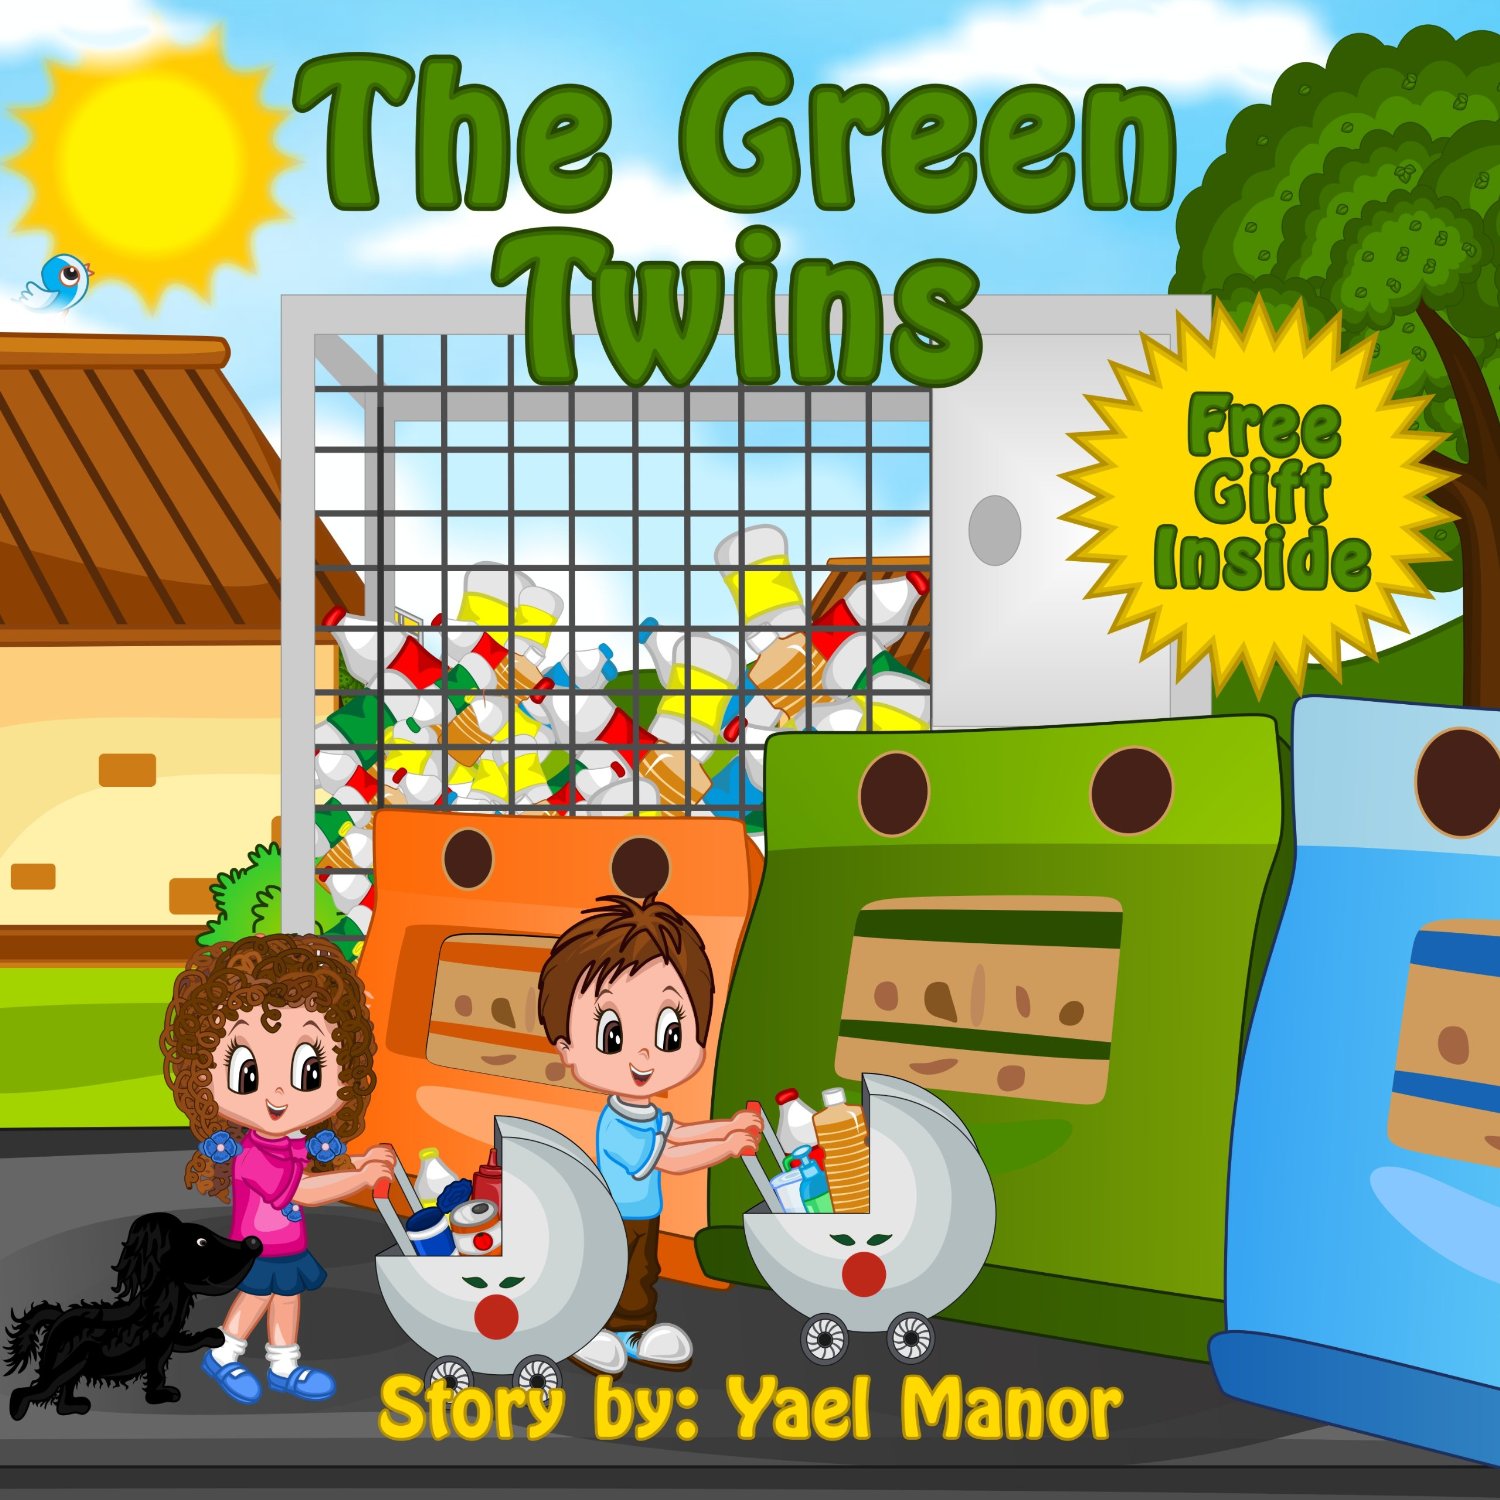 The Green Twins by Yael Manor